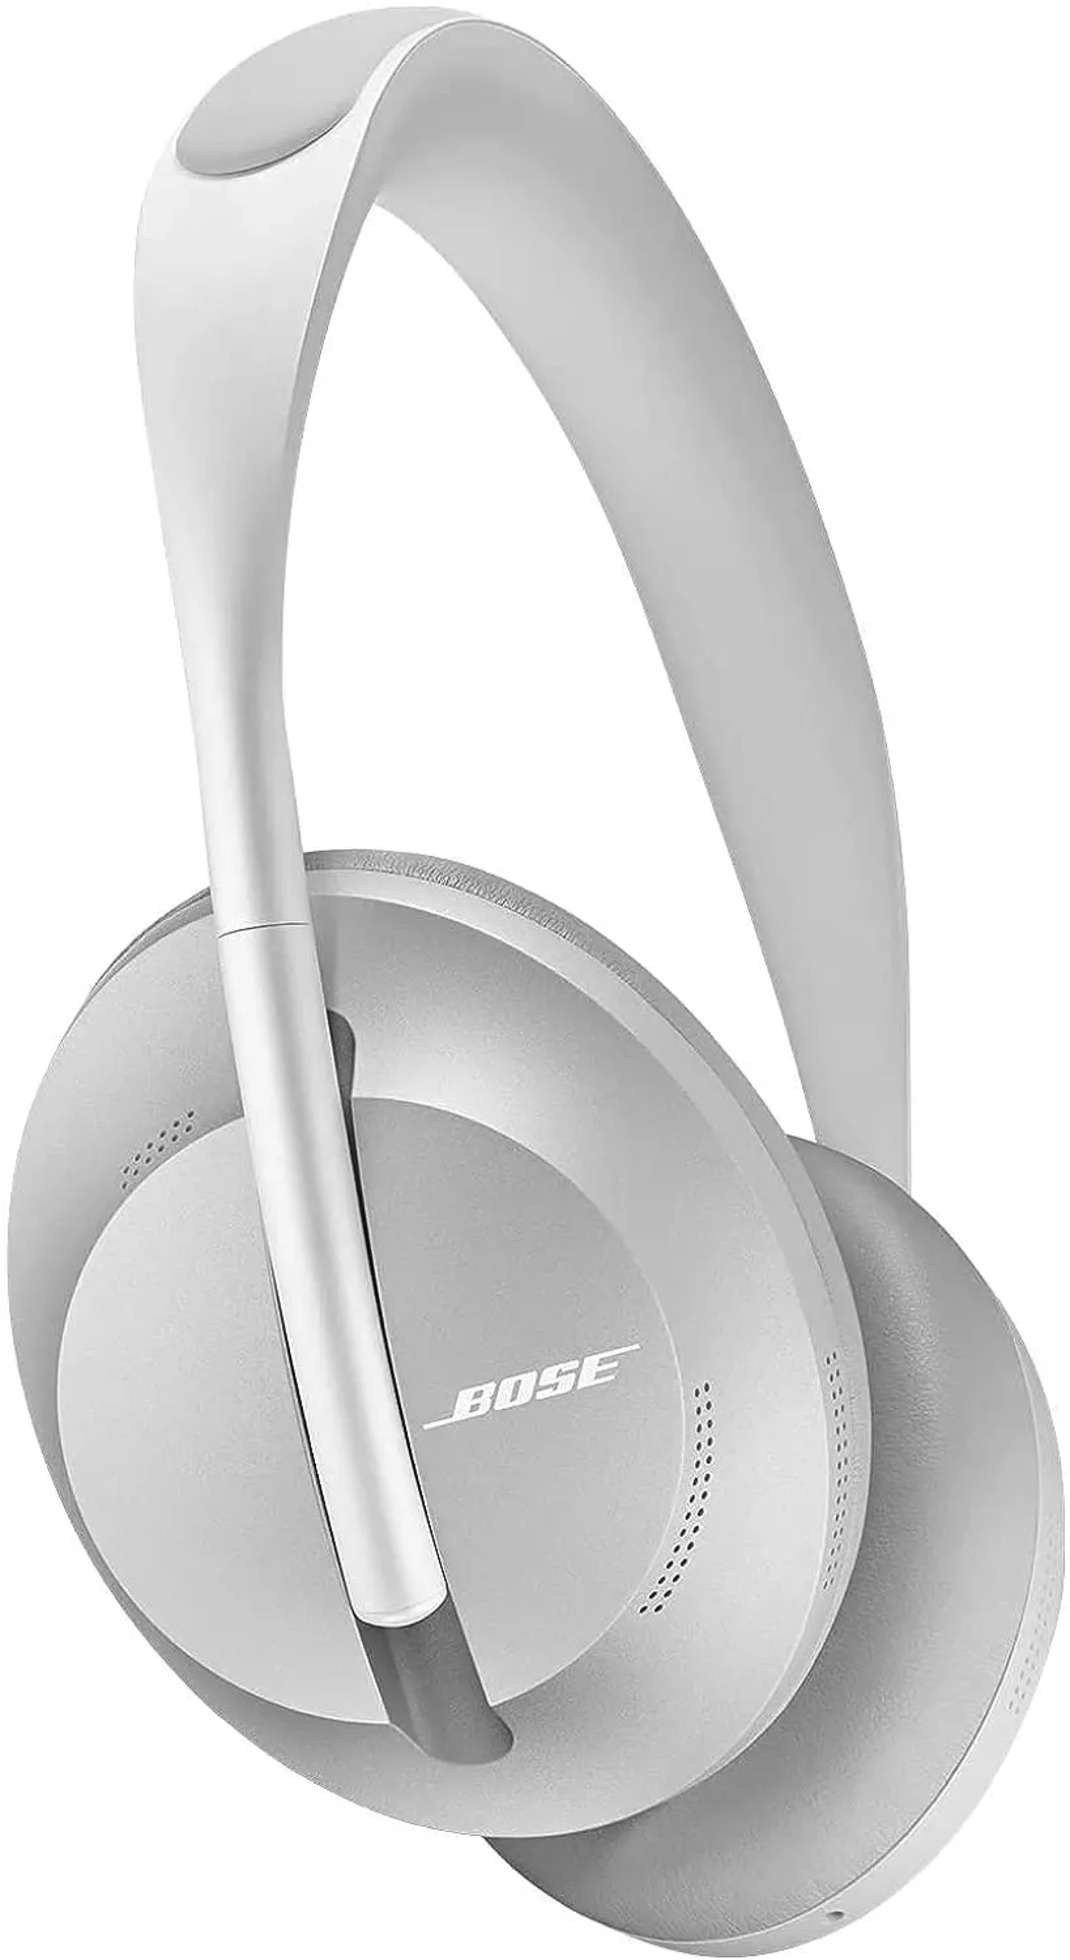 Compare Bose 700 Noise Gold) Bluetooth (Sliver Headphones the (Sliver vs Headphone Headphones Ear Bose Mic Luxe) Bluetooth - Cancelling One Bluetooth JBL (Champagne Noise v5.3 M2 Cancelling with 700 Tour Over